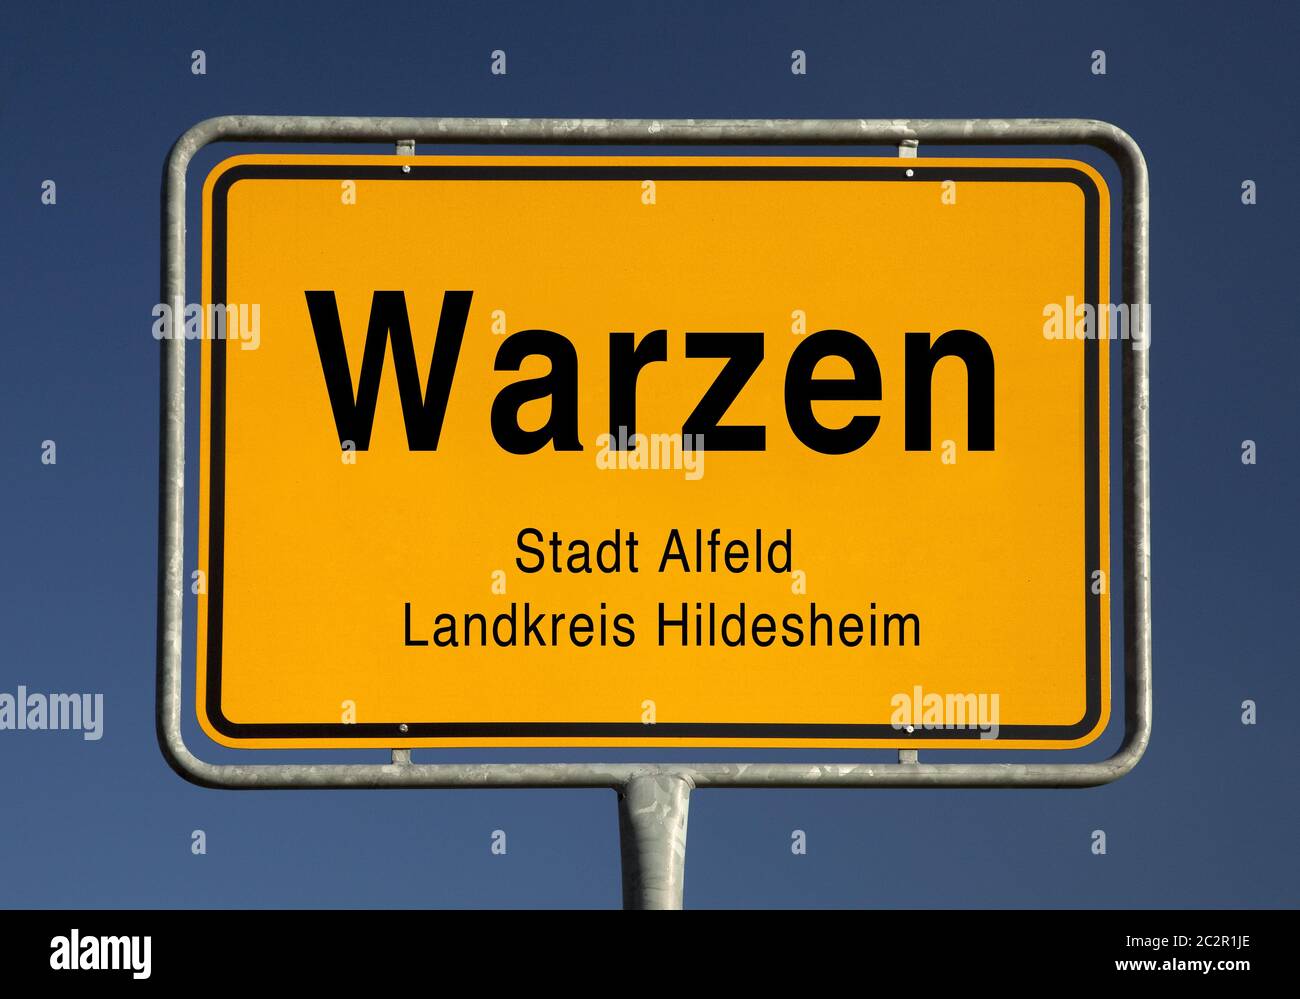 Warzen place name sign, district of the city of Alfeld (Leine), Lower Saxony, Germany, Europe Stock Photo